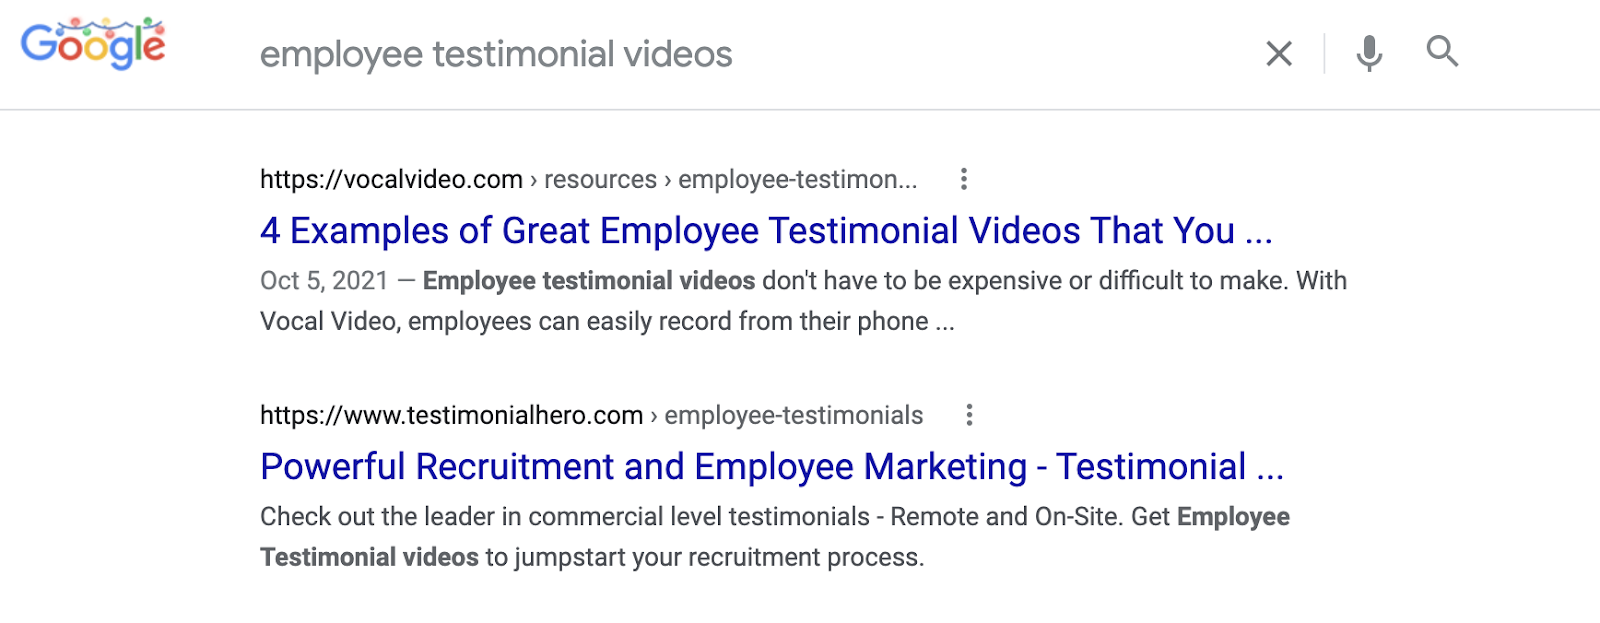 Google search result position #1 for "employee testimonial videos".